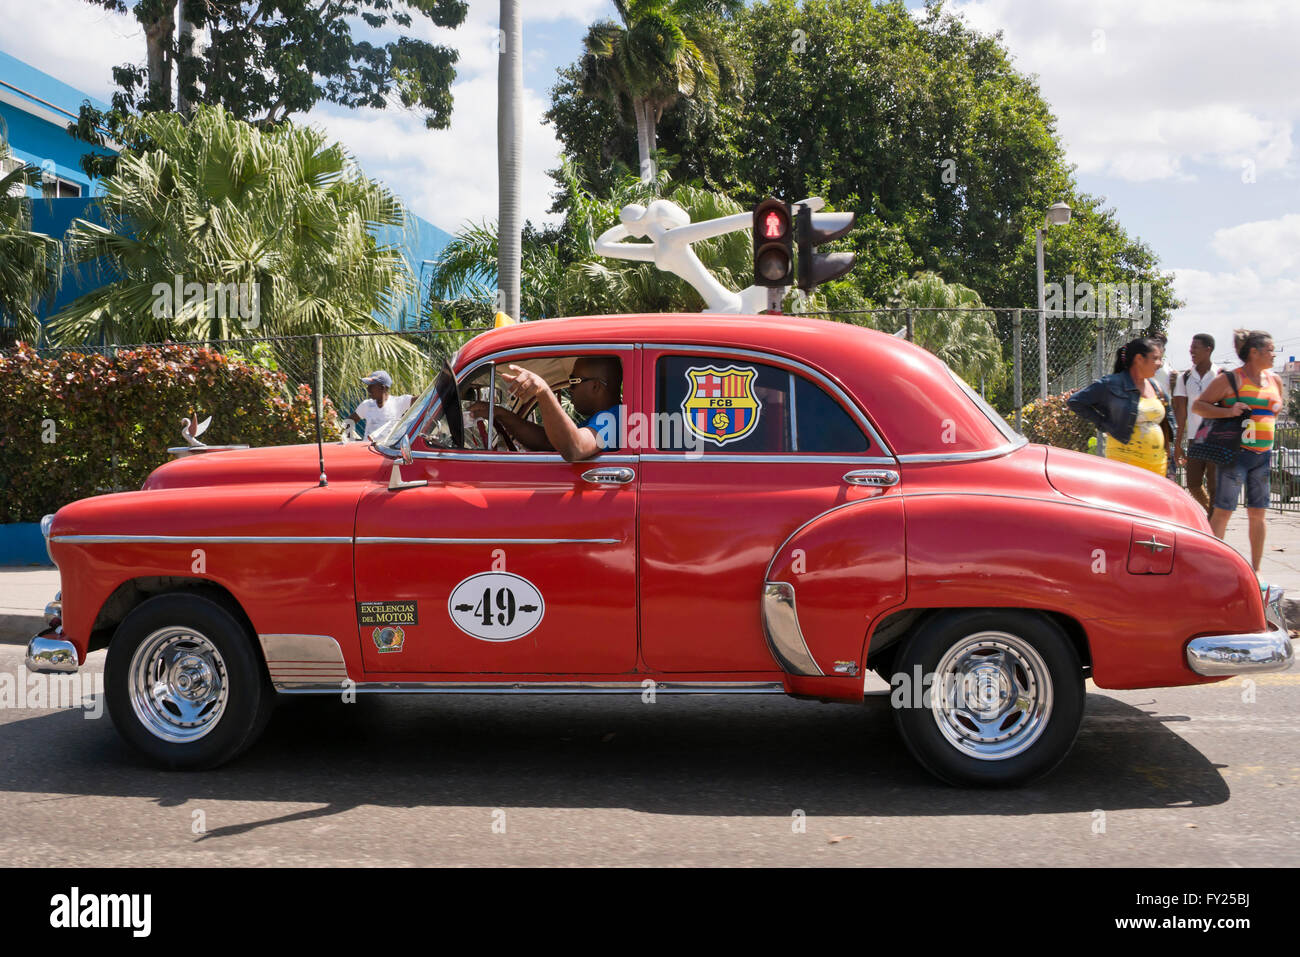 Horizontal view of a classic American taxi driving along a street in Havana, Cuba. Stock Photo